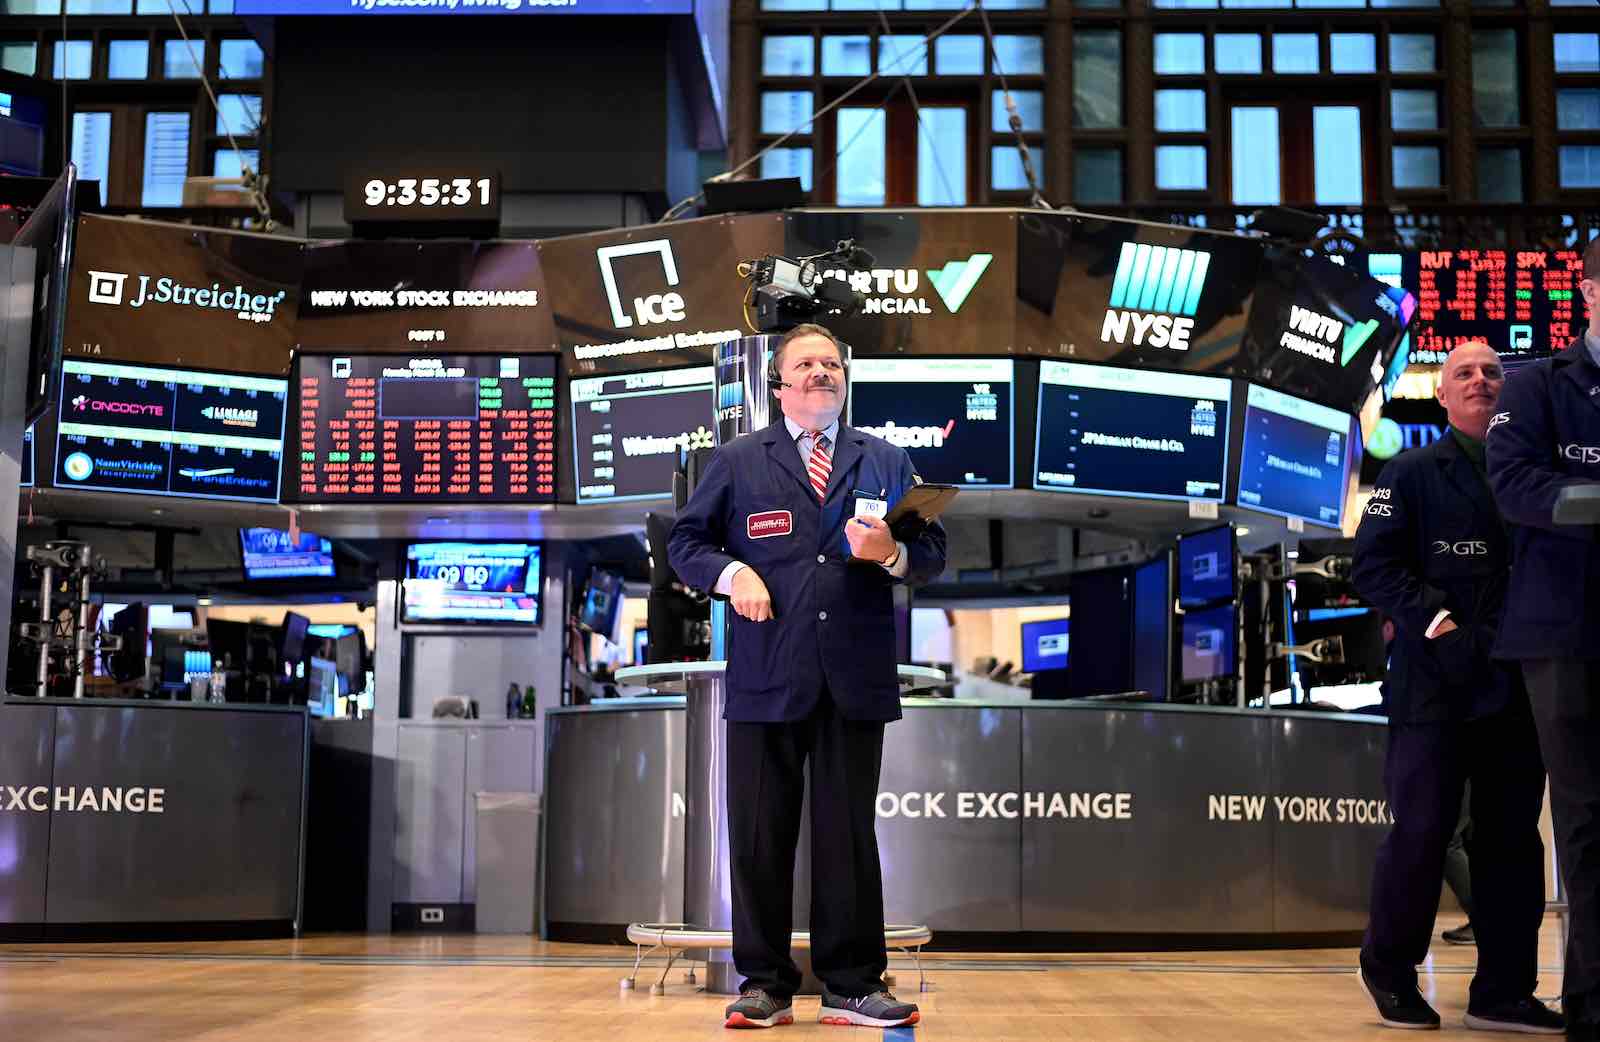 The trading floor of the New York Stock Exchange on Monday, 16 March, where trading was halted temporarily after steep losses (Johannes Eisele/AFP via Getty Images)